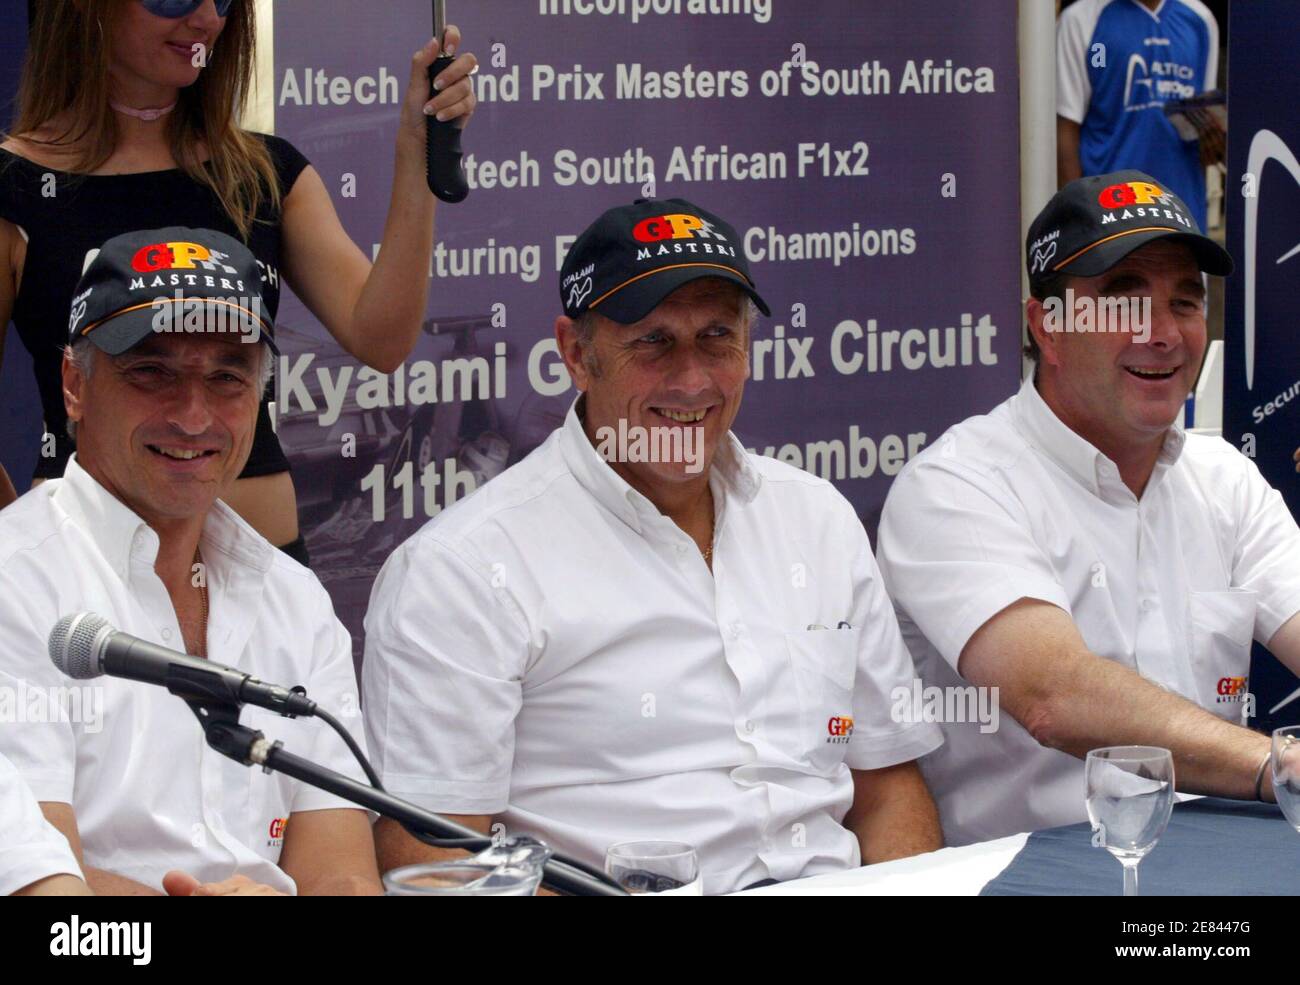 Britain's Nigel Mansell (R), Hans Stuck (C) from Germany and Riccardo Patrese (L) from Italy smile during a news conference at Sandton City square November 10,2005. South African Grand Prix Master series, take part in a first ever public demonstration of power around the streets of Sandton Central. REUTERS/Juda Ngwenya Stock Photo